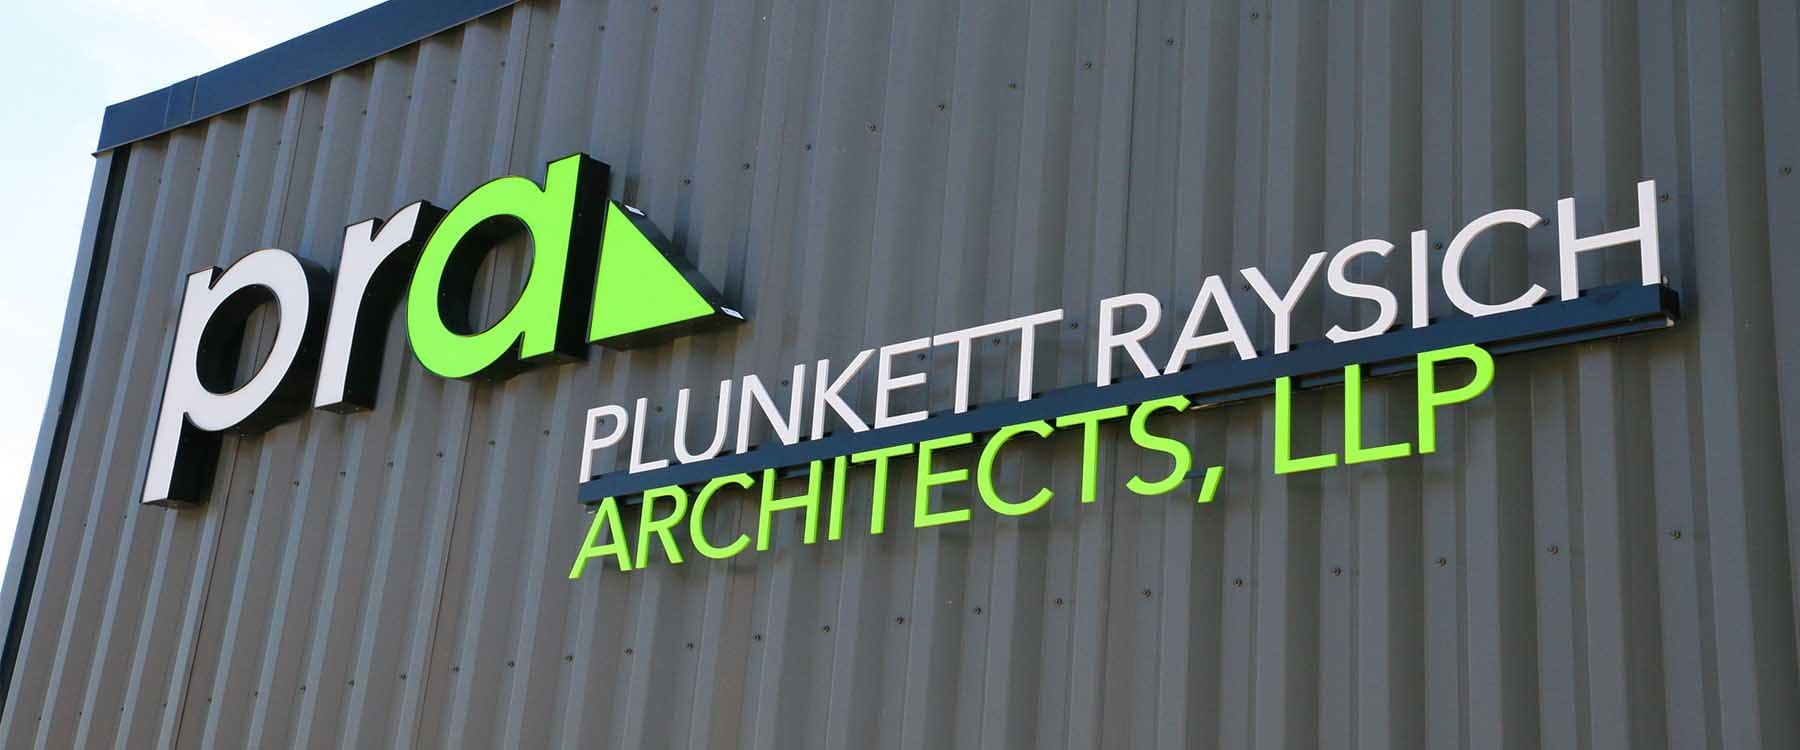 COVID-19 Update - Business as usual at Plunkett Raysich Architects - Plunkett Raysich Architects, LLP